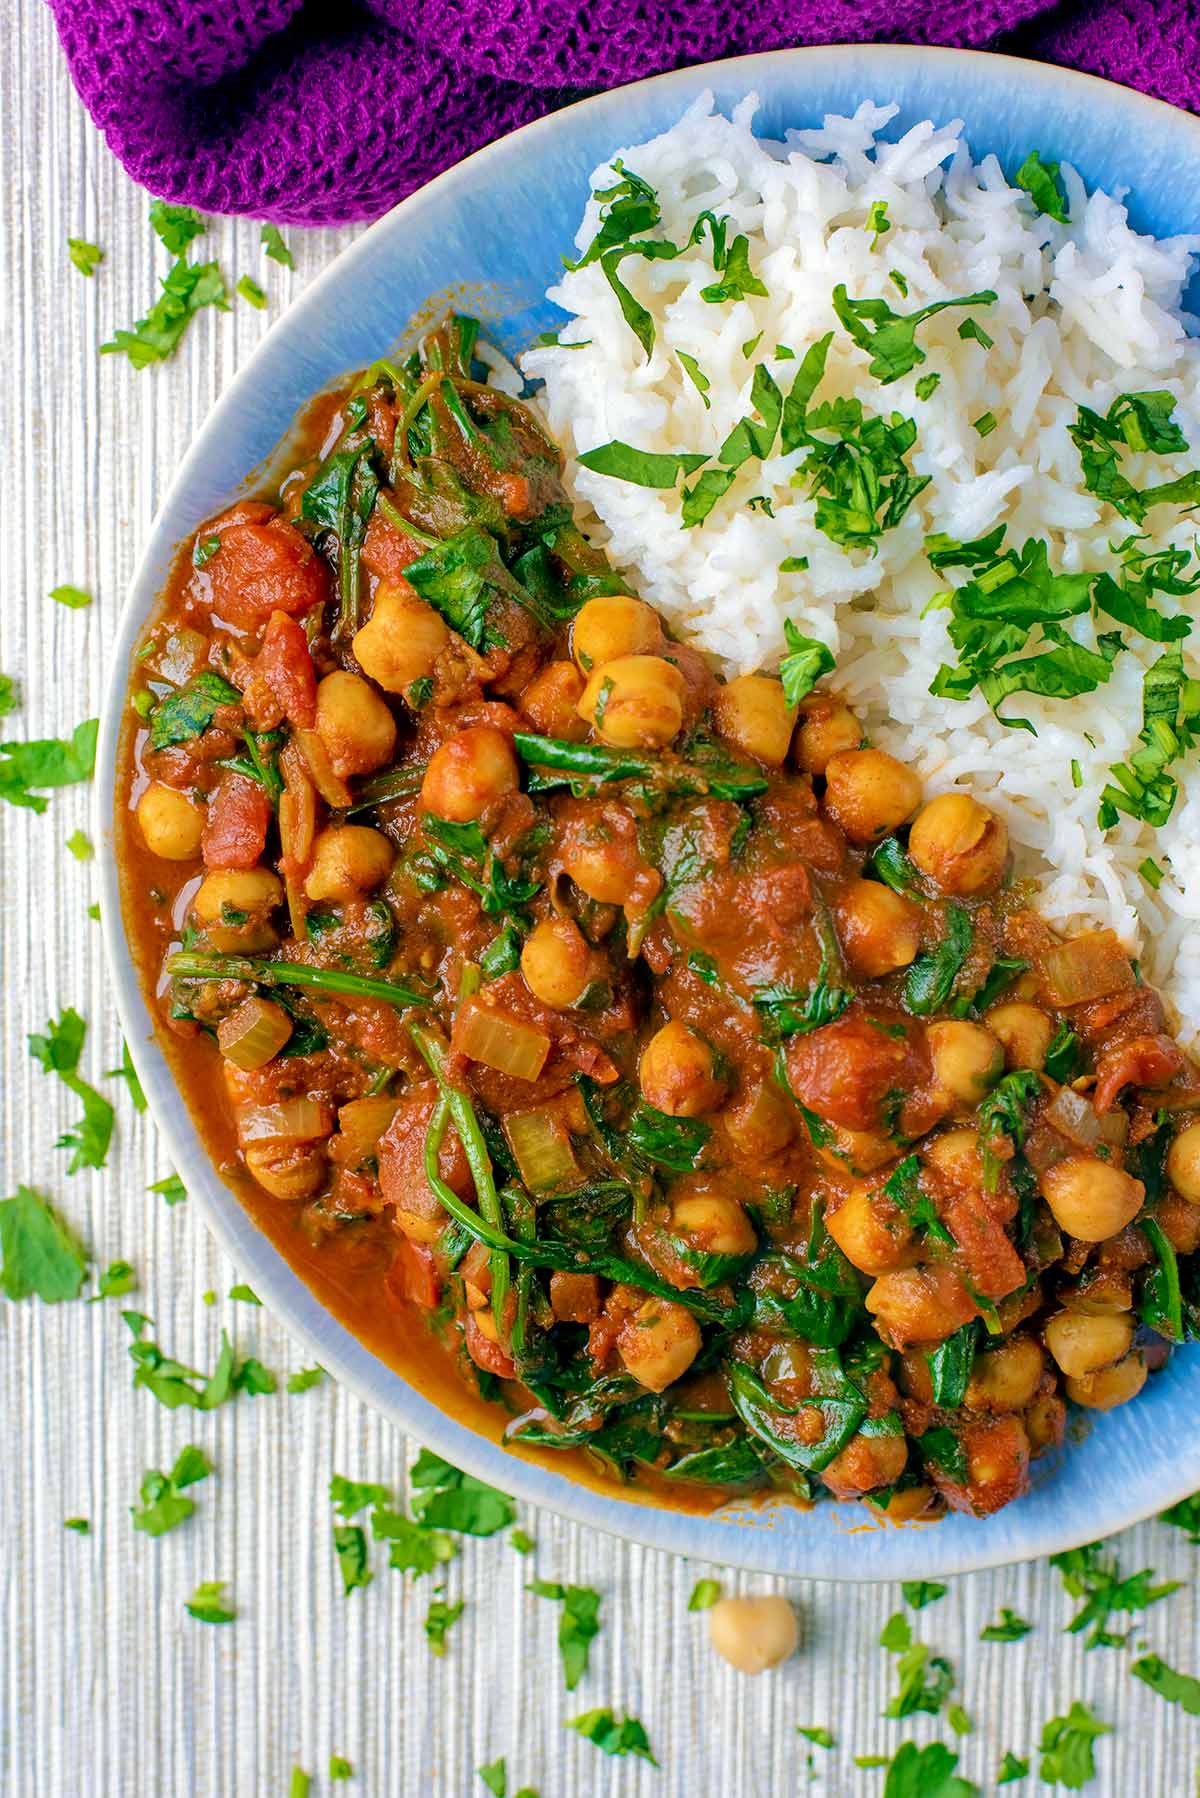 Curried chickpeas and rice on a blue plate.